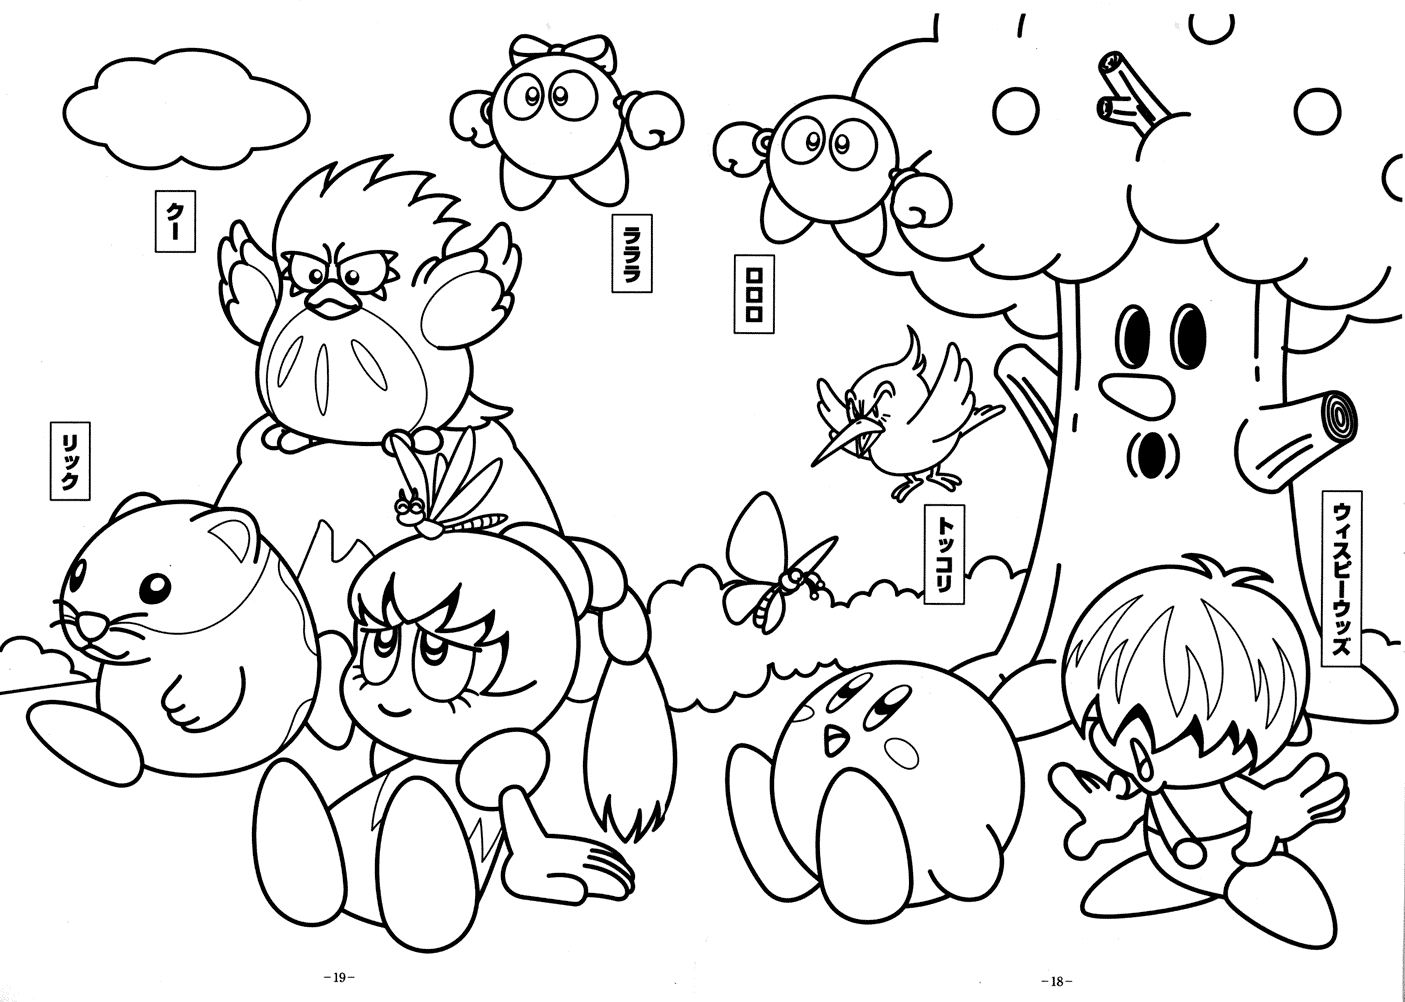 Village Kirby Coloring Pages